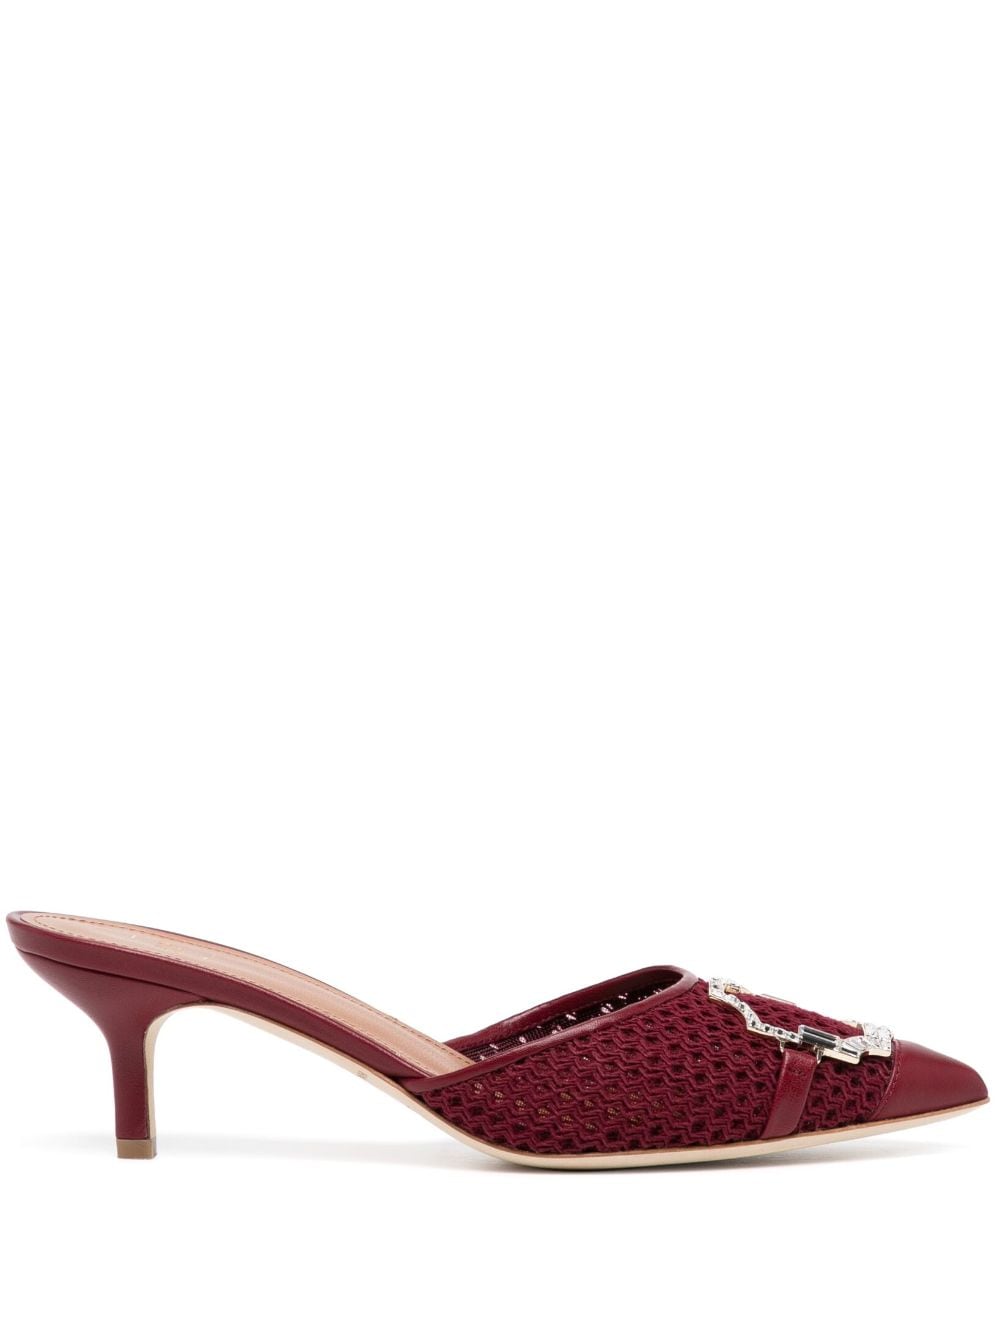 Malone Souliers Missy Mules - Rot von Malone Souliers